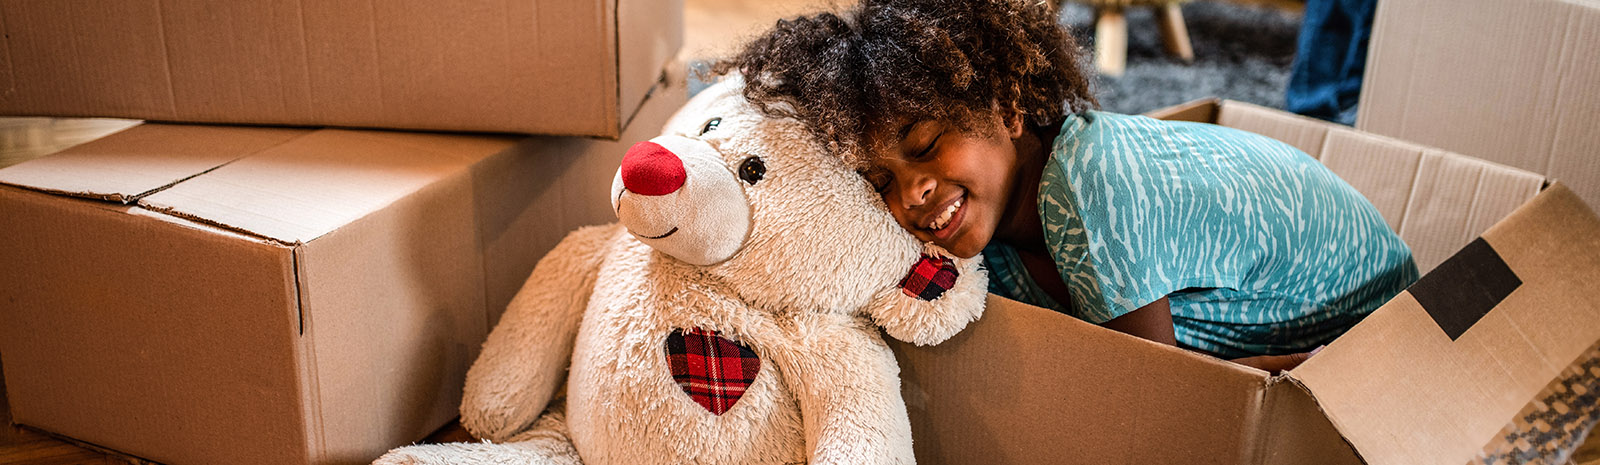 IMAGE: Young girl in moving box smiling and leaning head on large teddy bear.